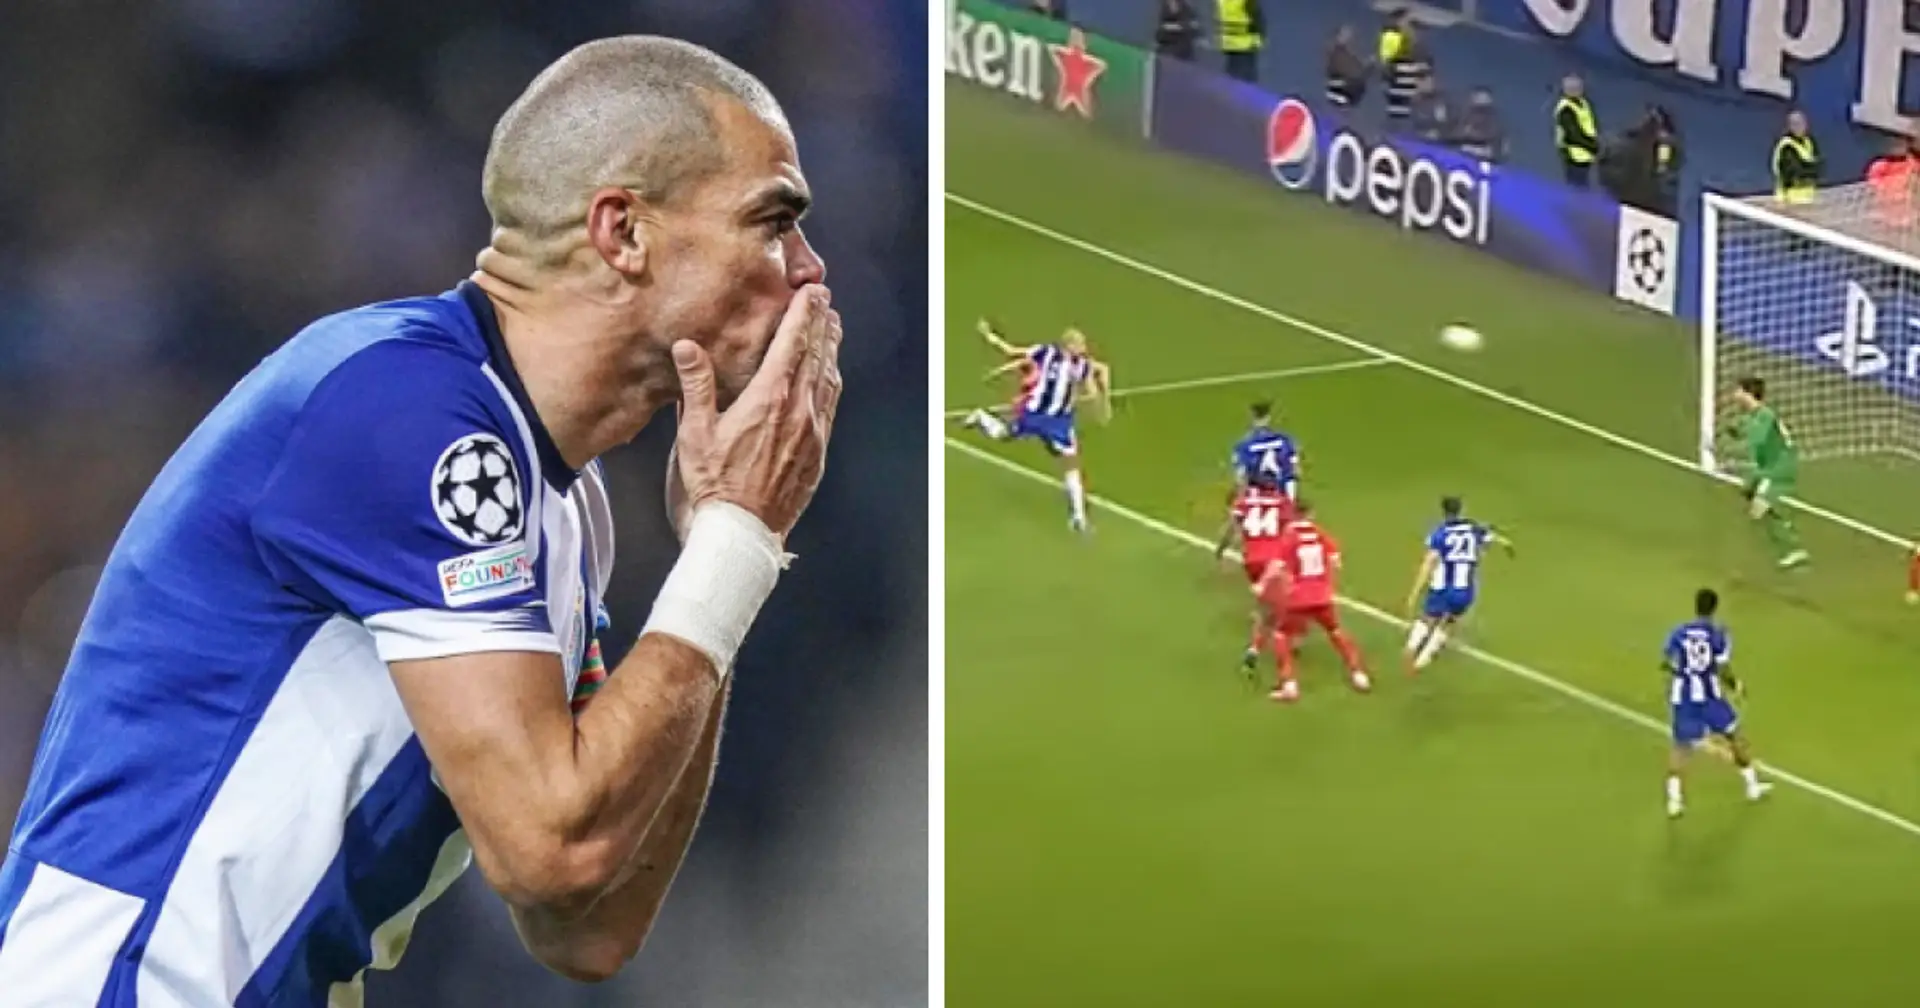 'To be here at this age it’s incredible': Pepe becomes the oldest player to score in Champions League history